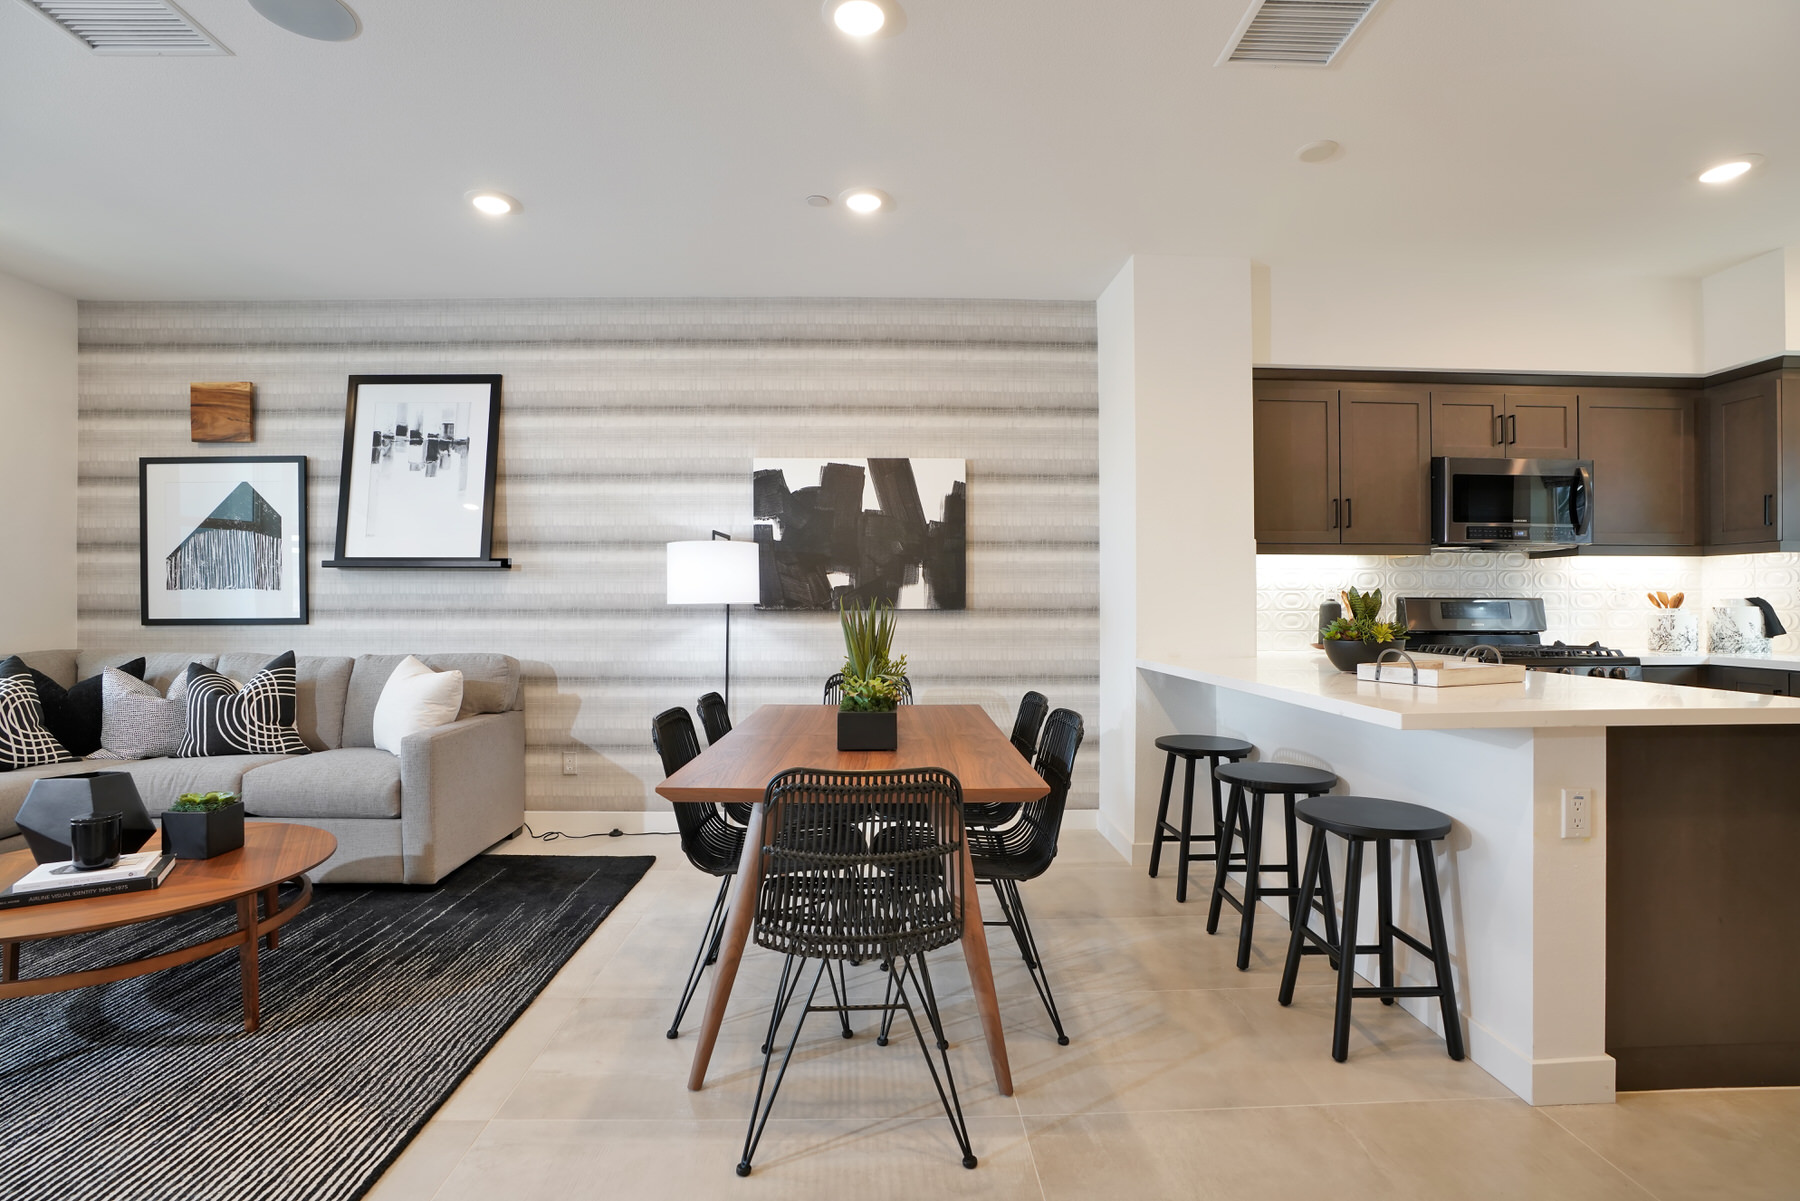 Living/Dining/Kitchen in Plan 1 at Townes at Magnolia by Melia Homes in Anaheim, CA